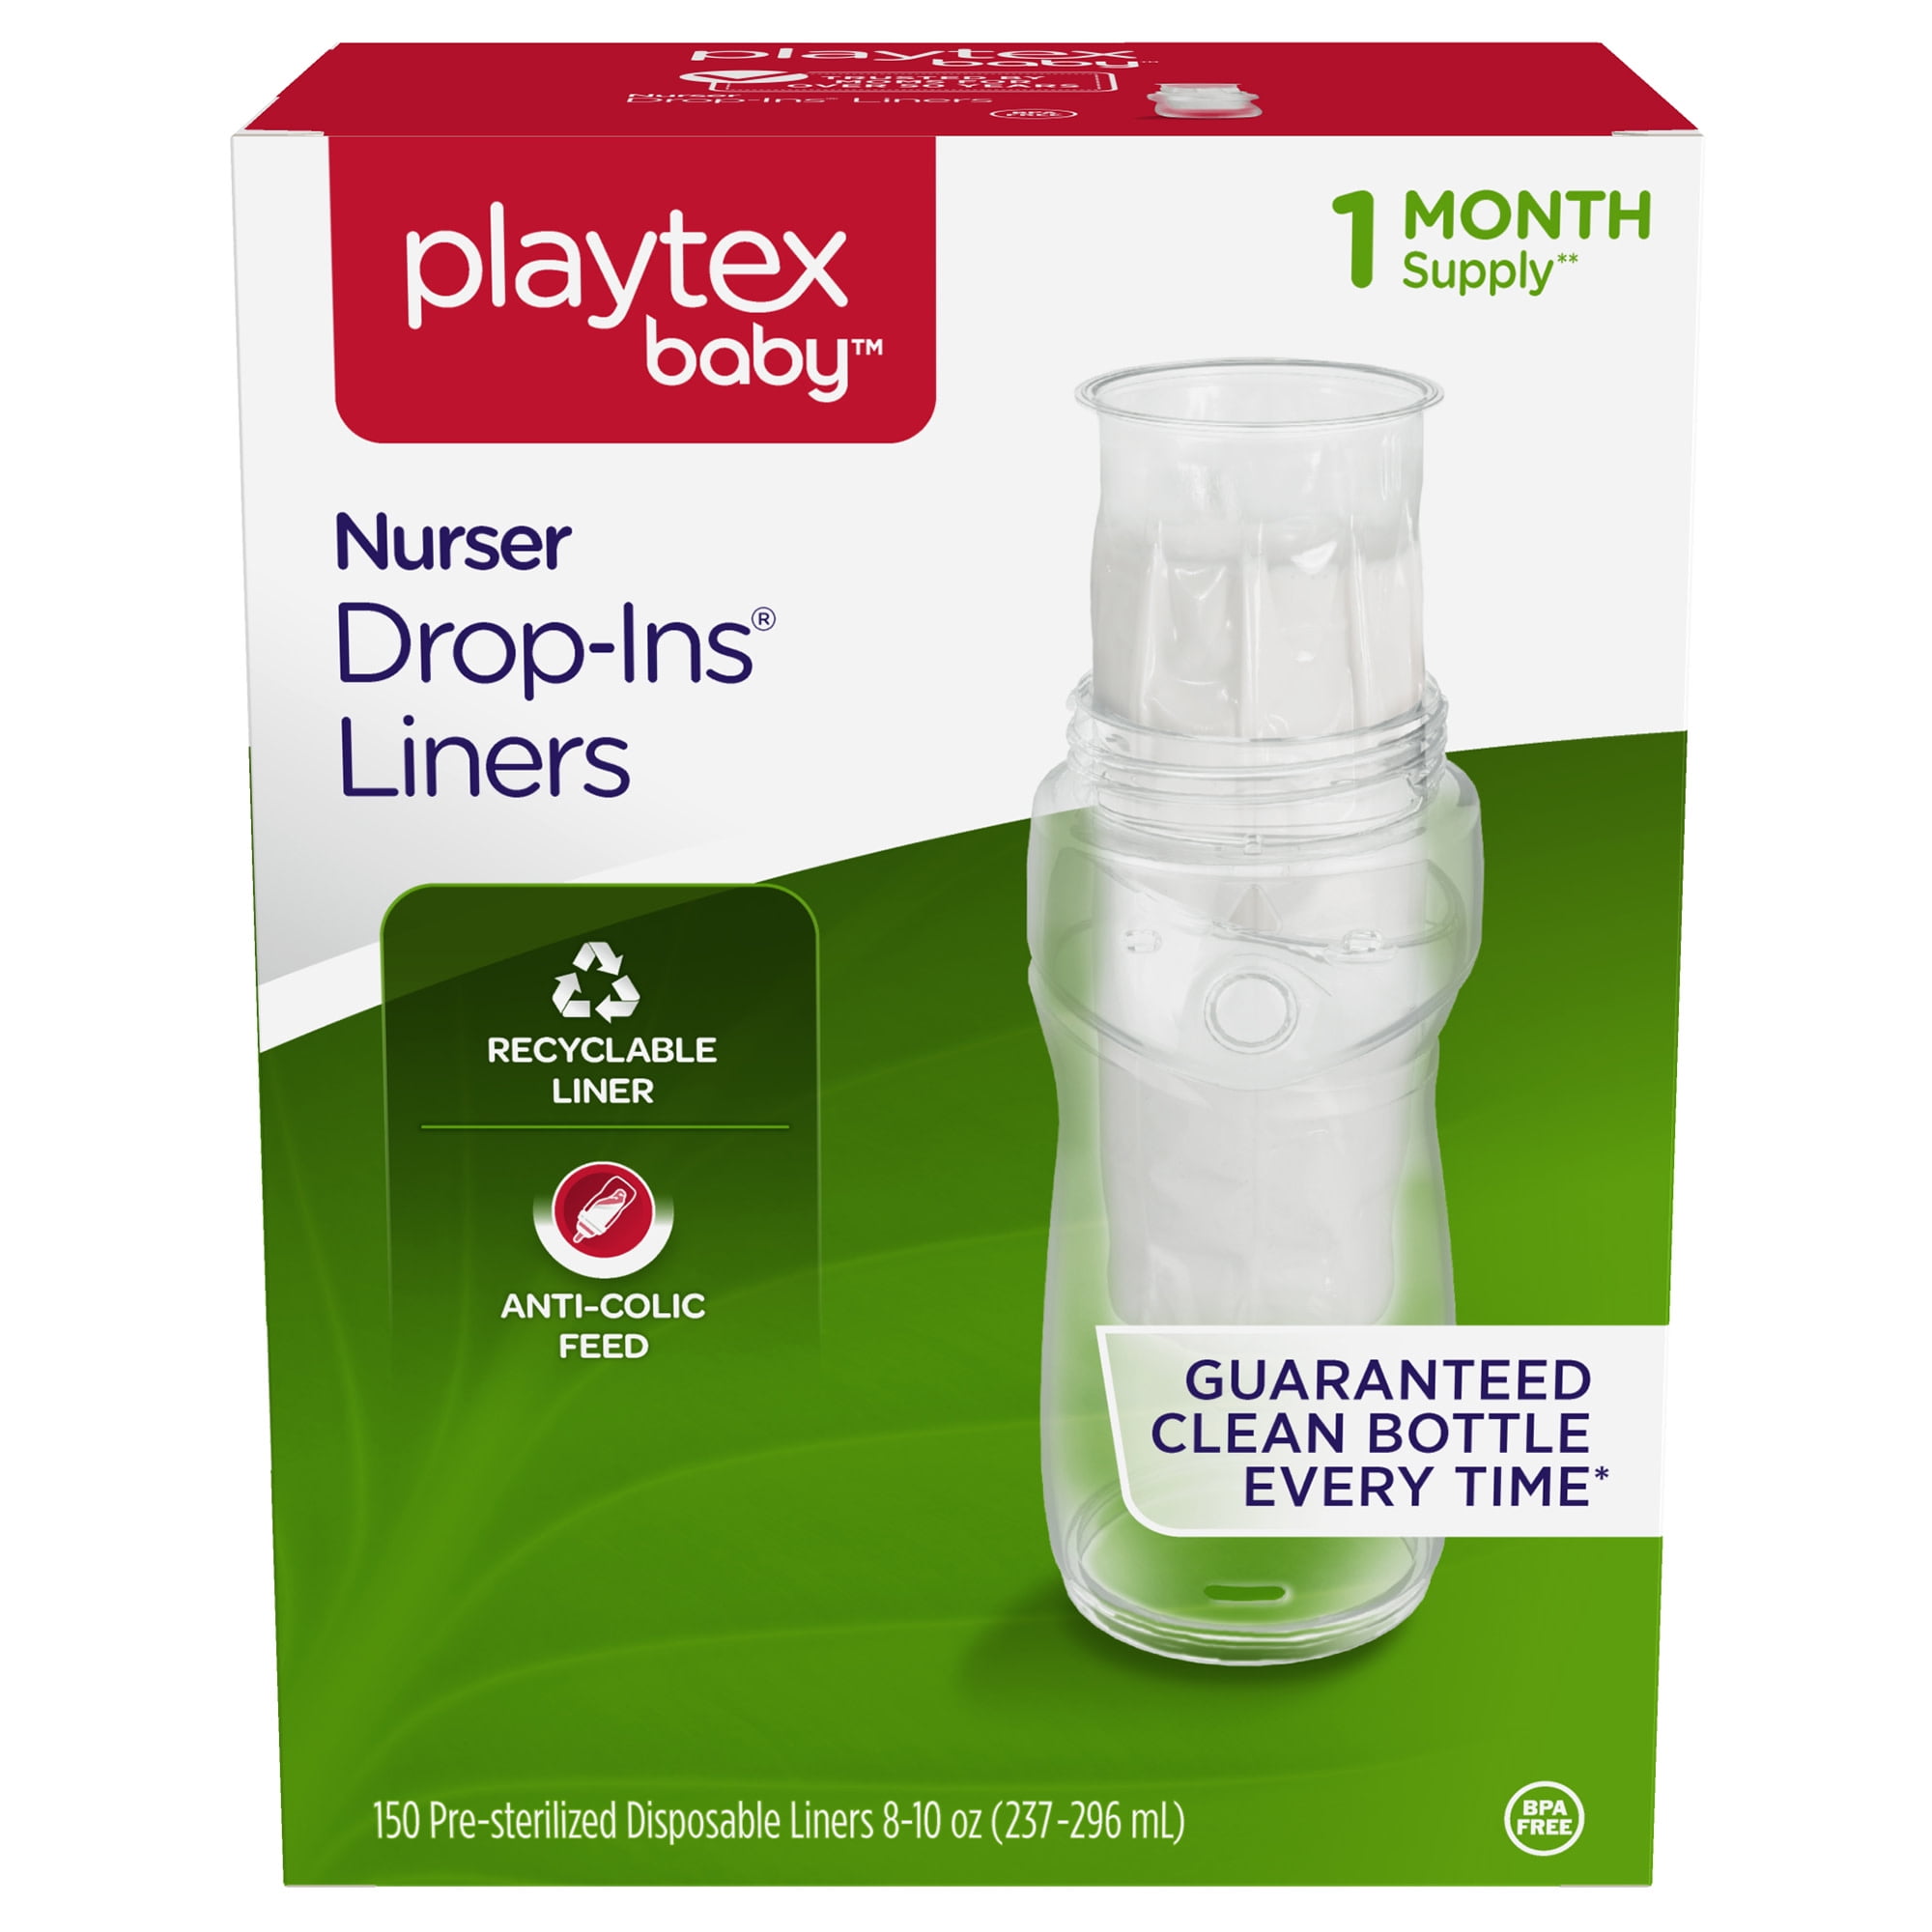 Lot OF 24 Brand New Playtex 8 Ounce Drop Ins Nurser Bottles w/ Optional Liners 